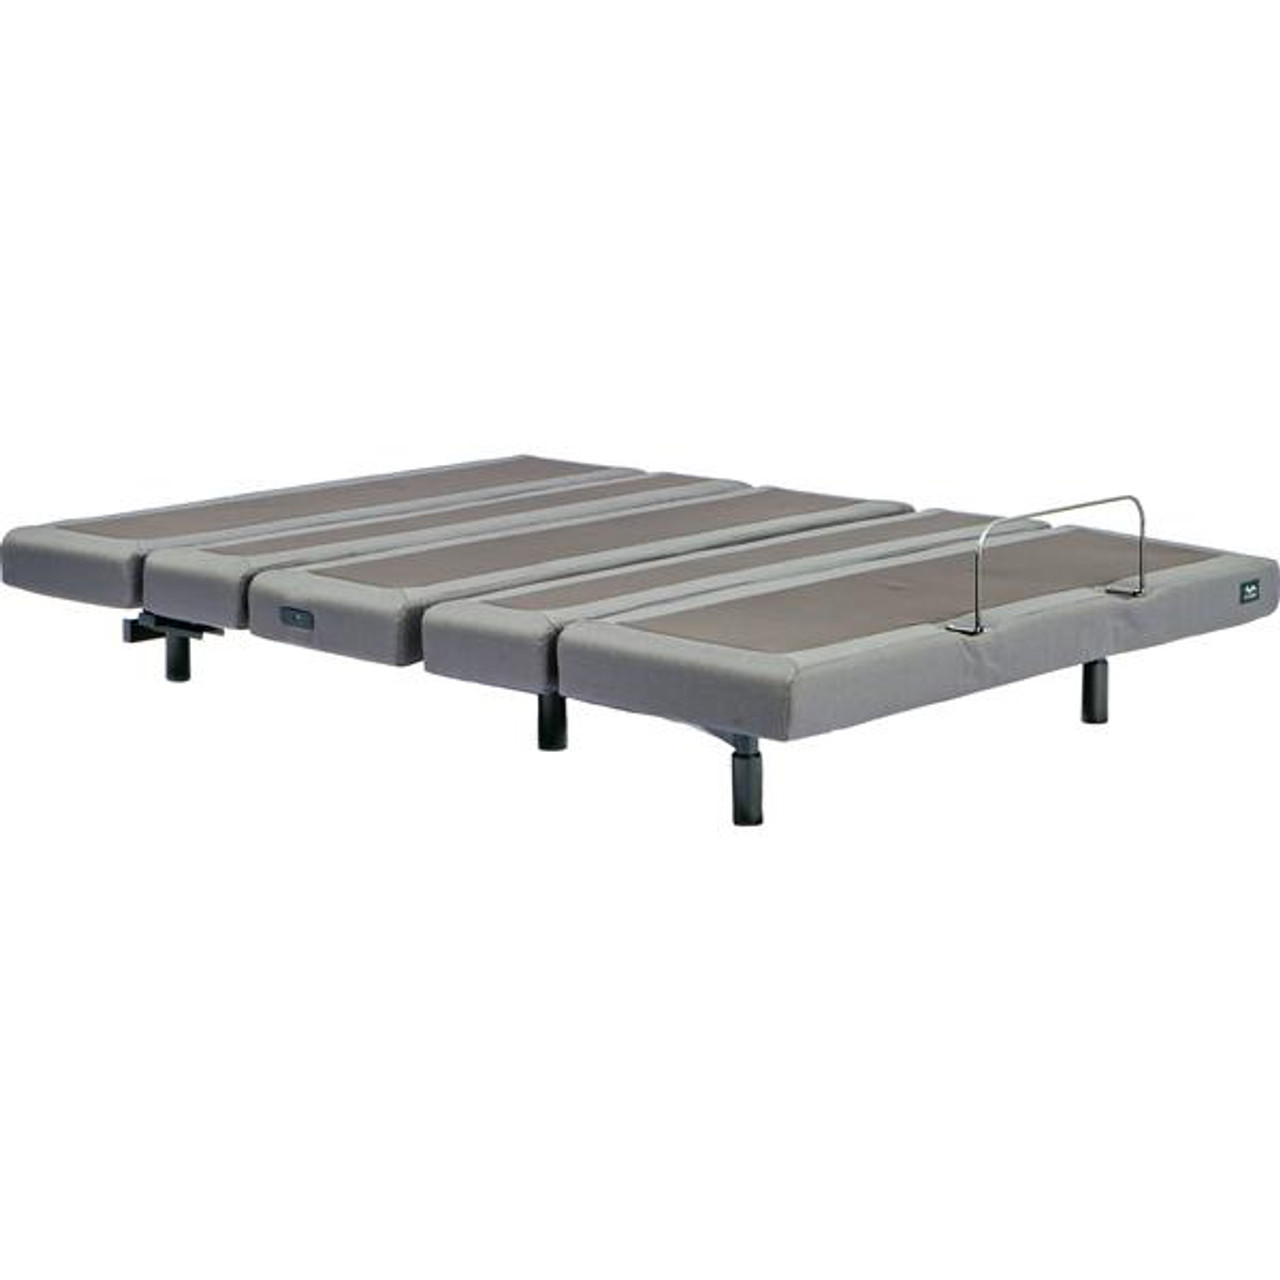 Rize Adjustable Bed Rize Adjustable Bed Sale - In Stock Contemporary and Remedy Bases